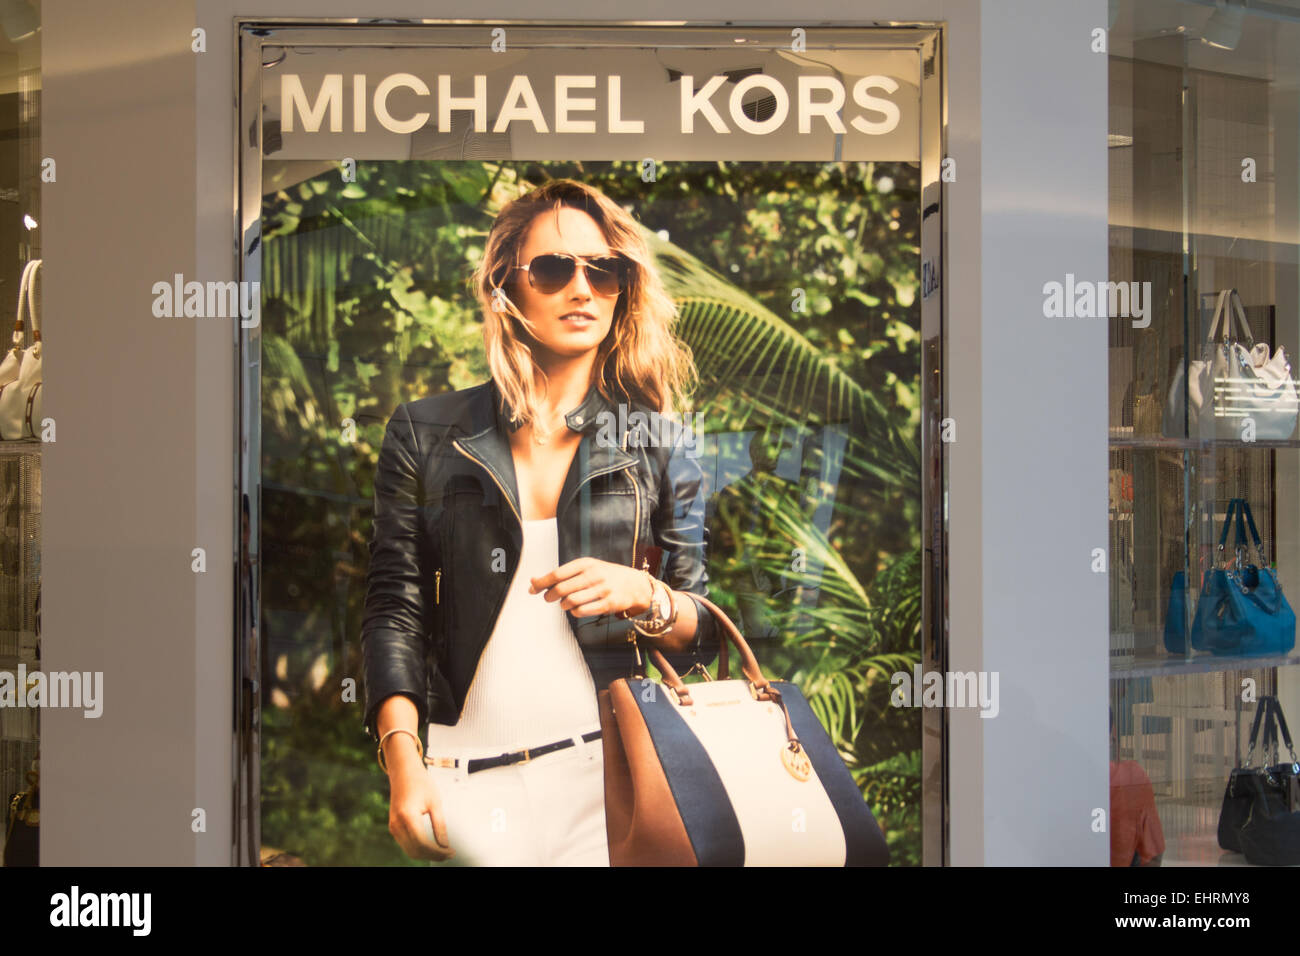 michael kors chicago outlet